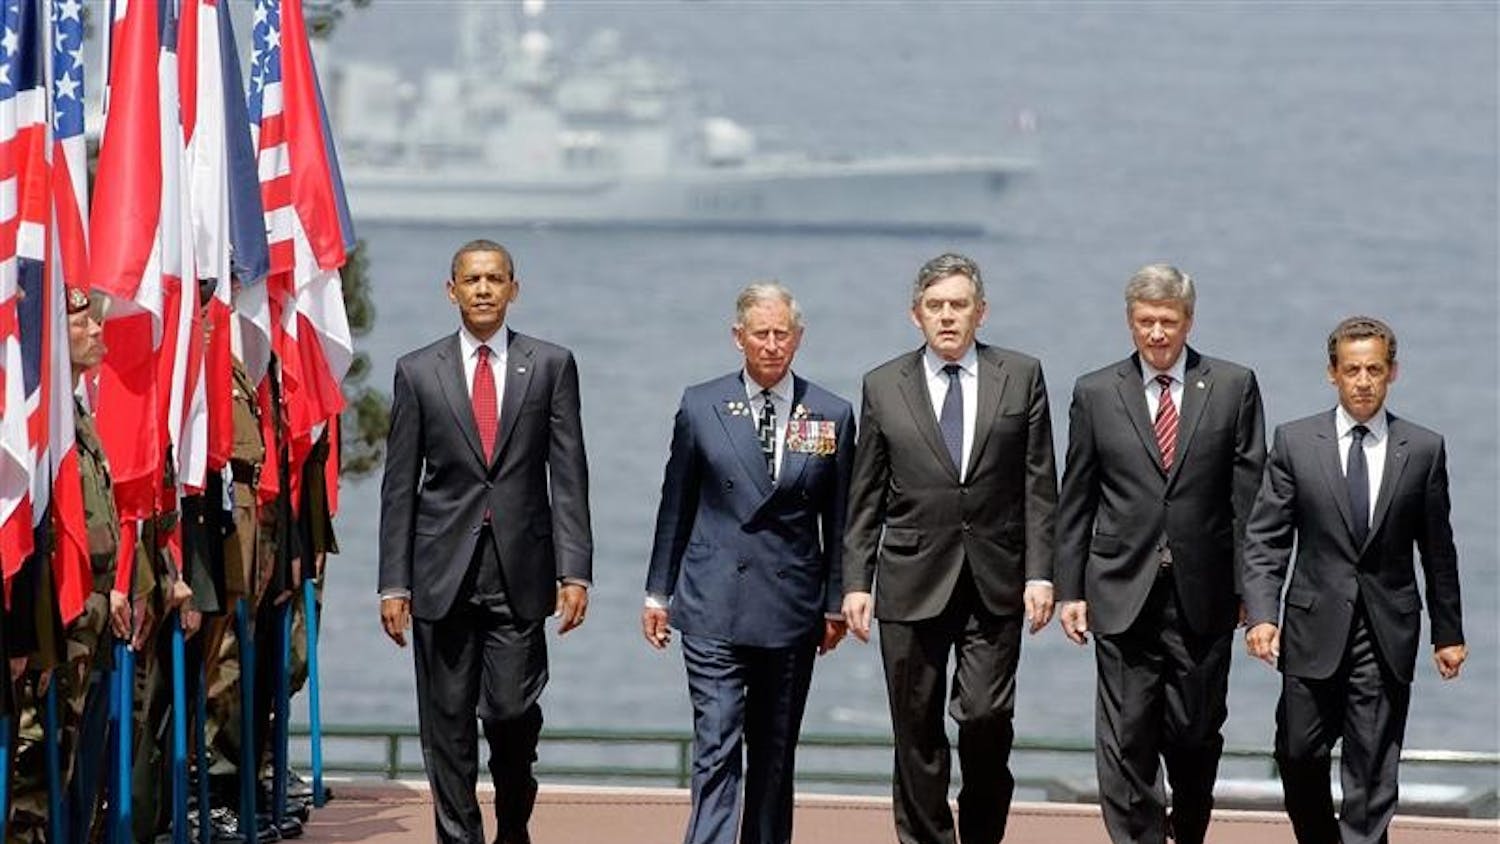 From left, U.S. President Barack Obama, Britain's Prince Charles, British Prime Minister Gordon Brown, Canadian Prime Minister Stephen Harper, and French President Nicolas Sarkozy arrive at the American Cemetery at Colleville-Sur -Mer, near Caen, Western France, Saturday, June 6, 2009 to attend the 65th Anniversary of the D-day landings in Normandy. 